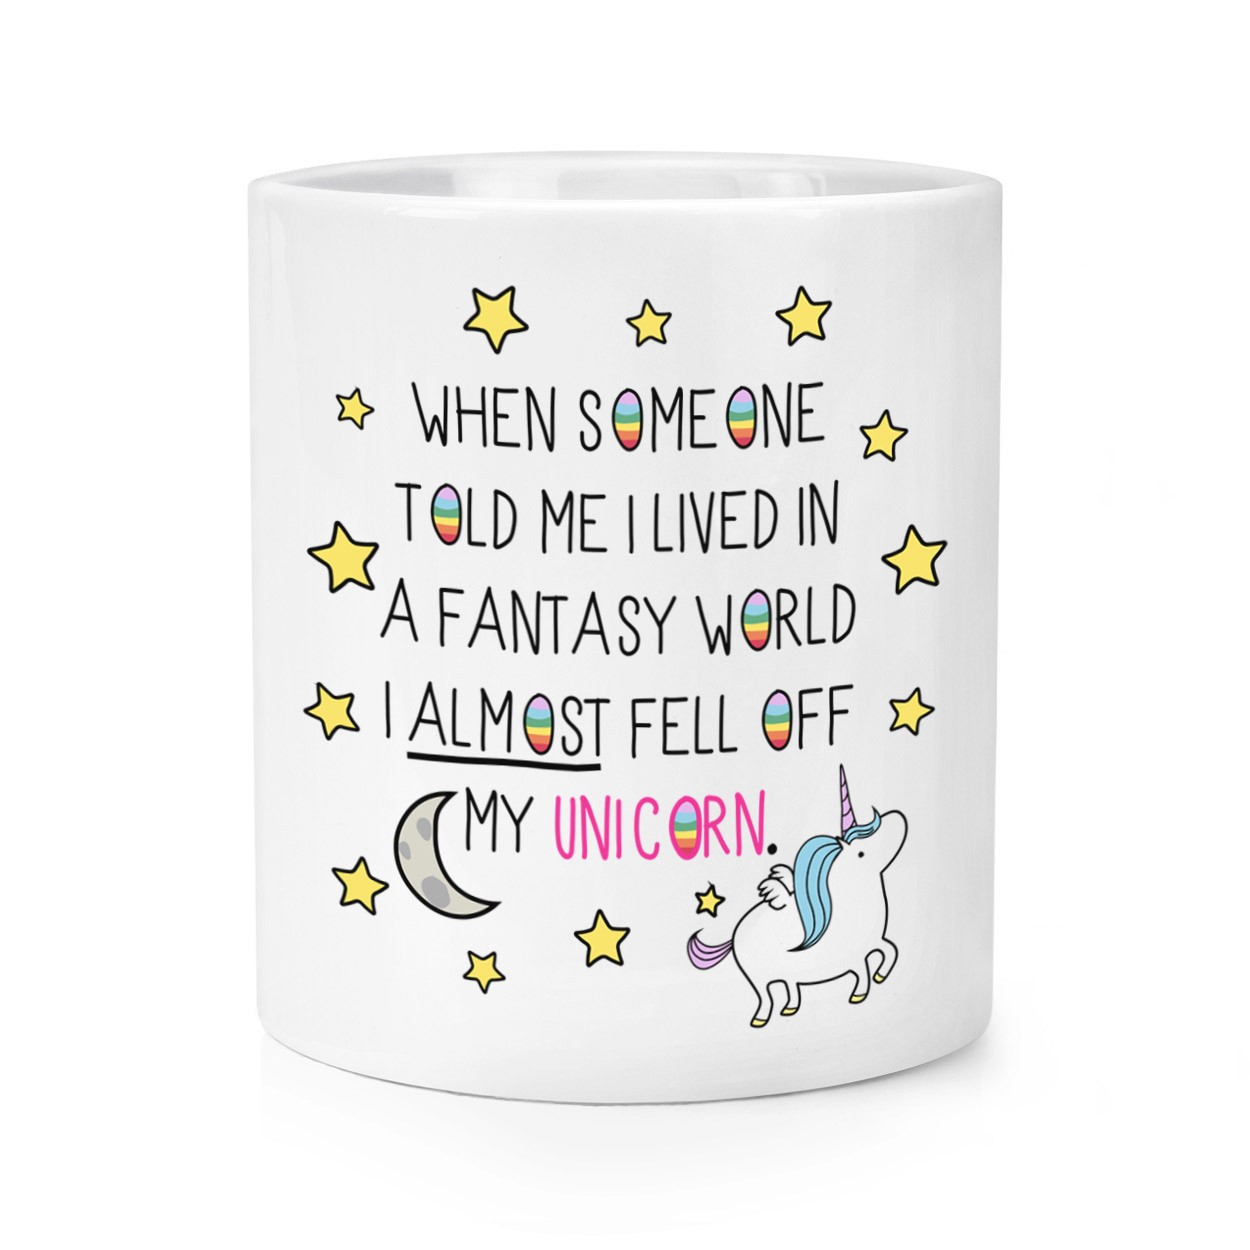 Unicorn When Someone Told Me I Lived In A Fantasy World Makeup Brush Pencil Pot